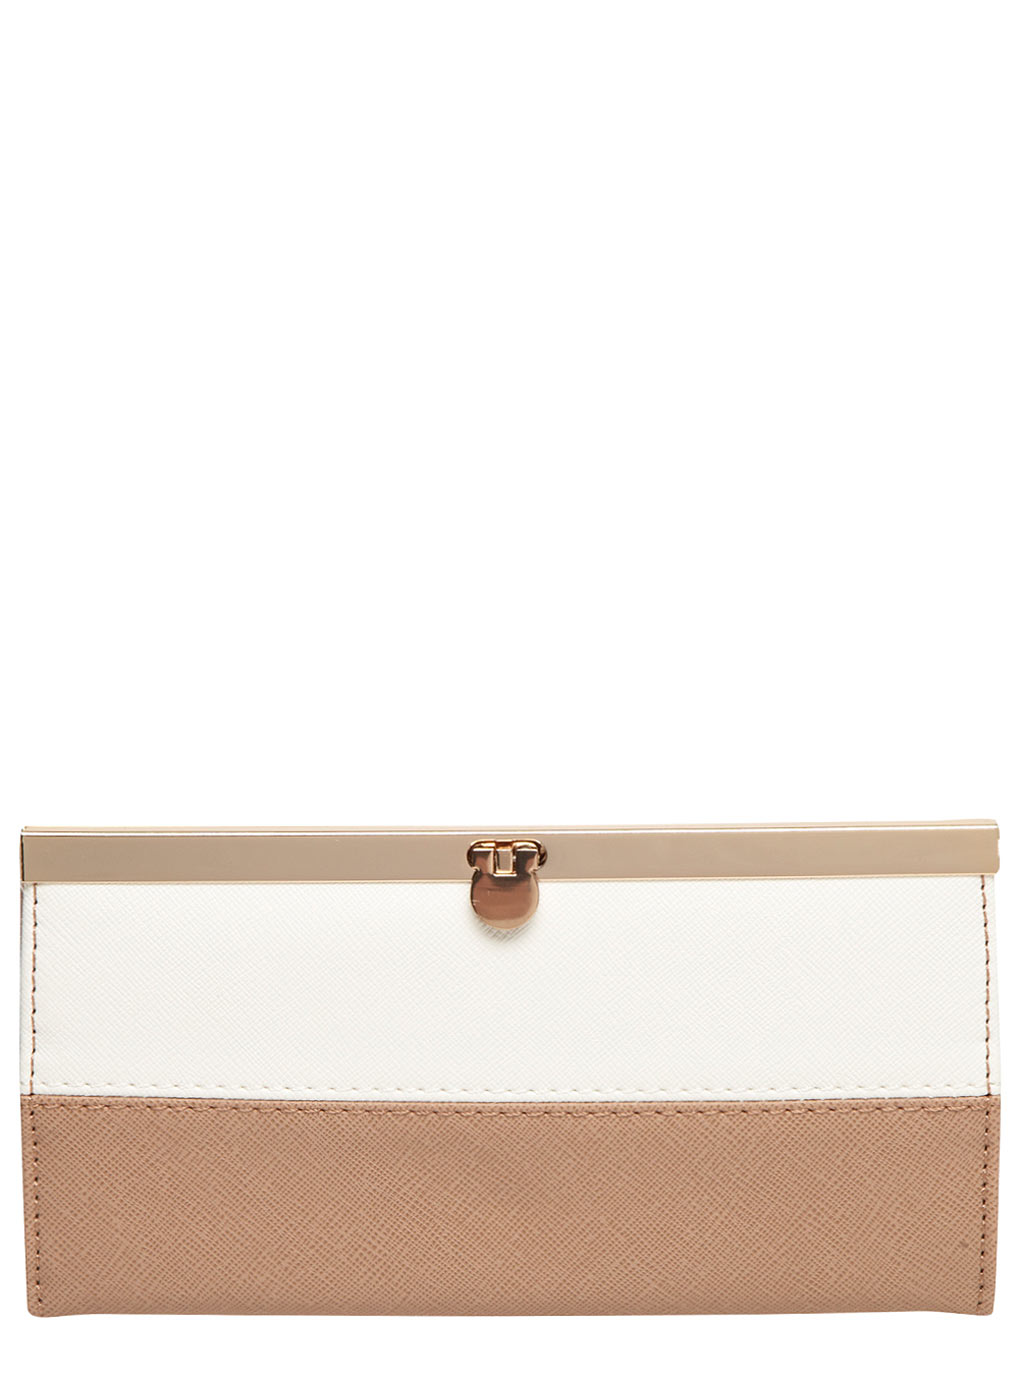 White and camel bar top purse 18344240